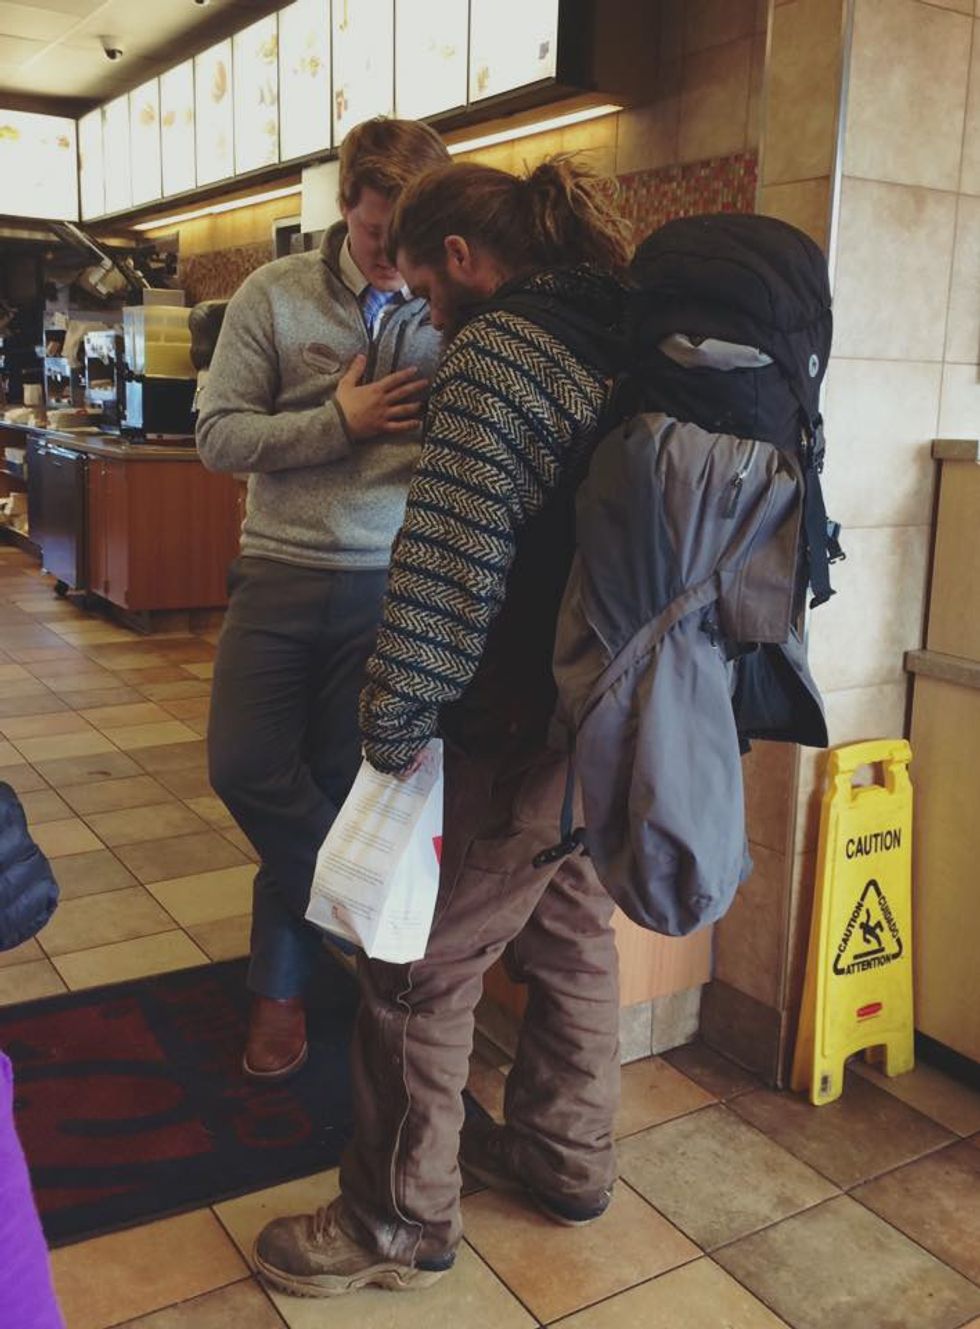 Man and His Daughter Witness 'Beautiful Scene' as Chick-fil-A Manager Prays With Homeless Man